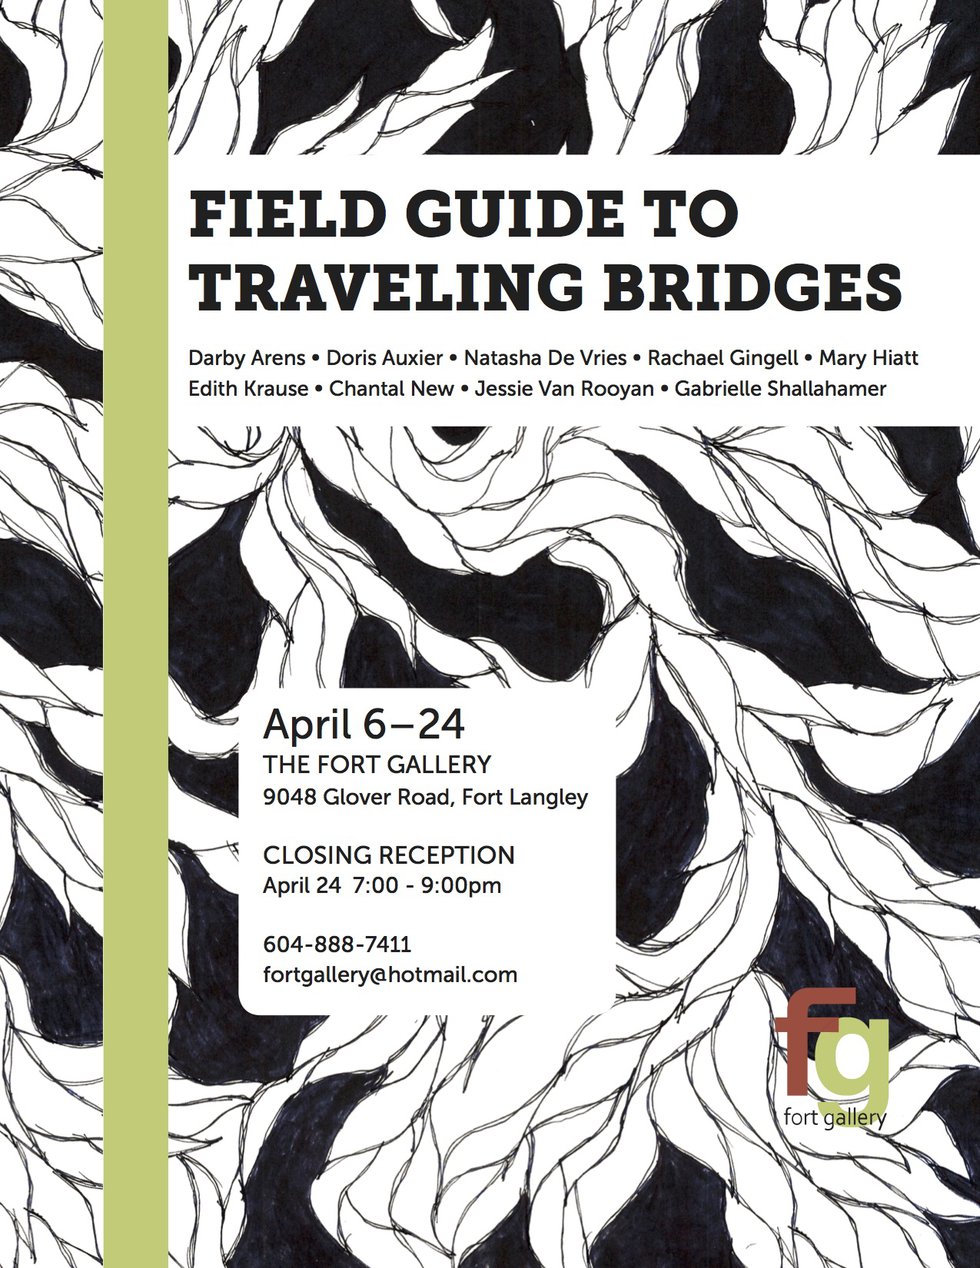 "Field Guide to Traveling Bridges"